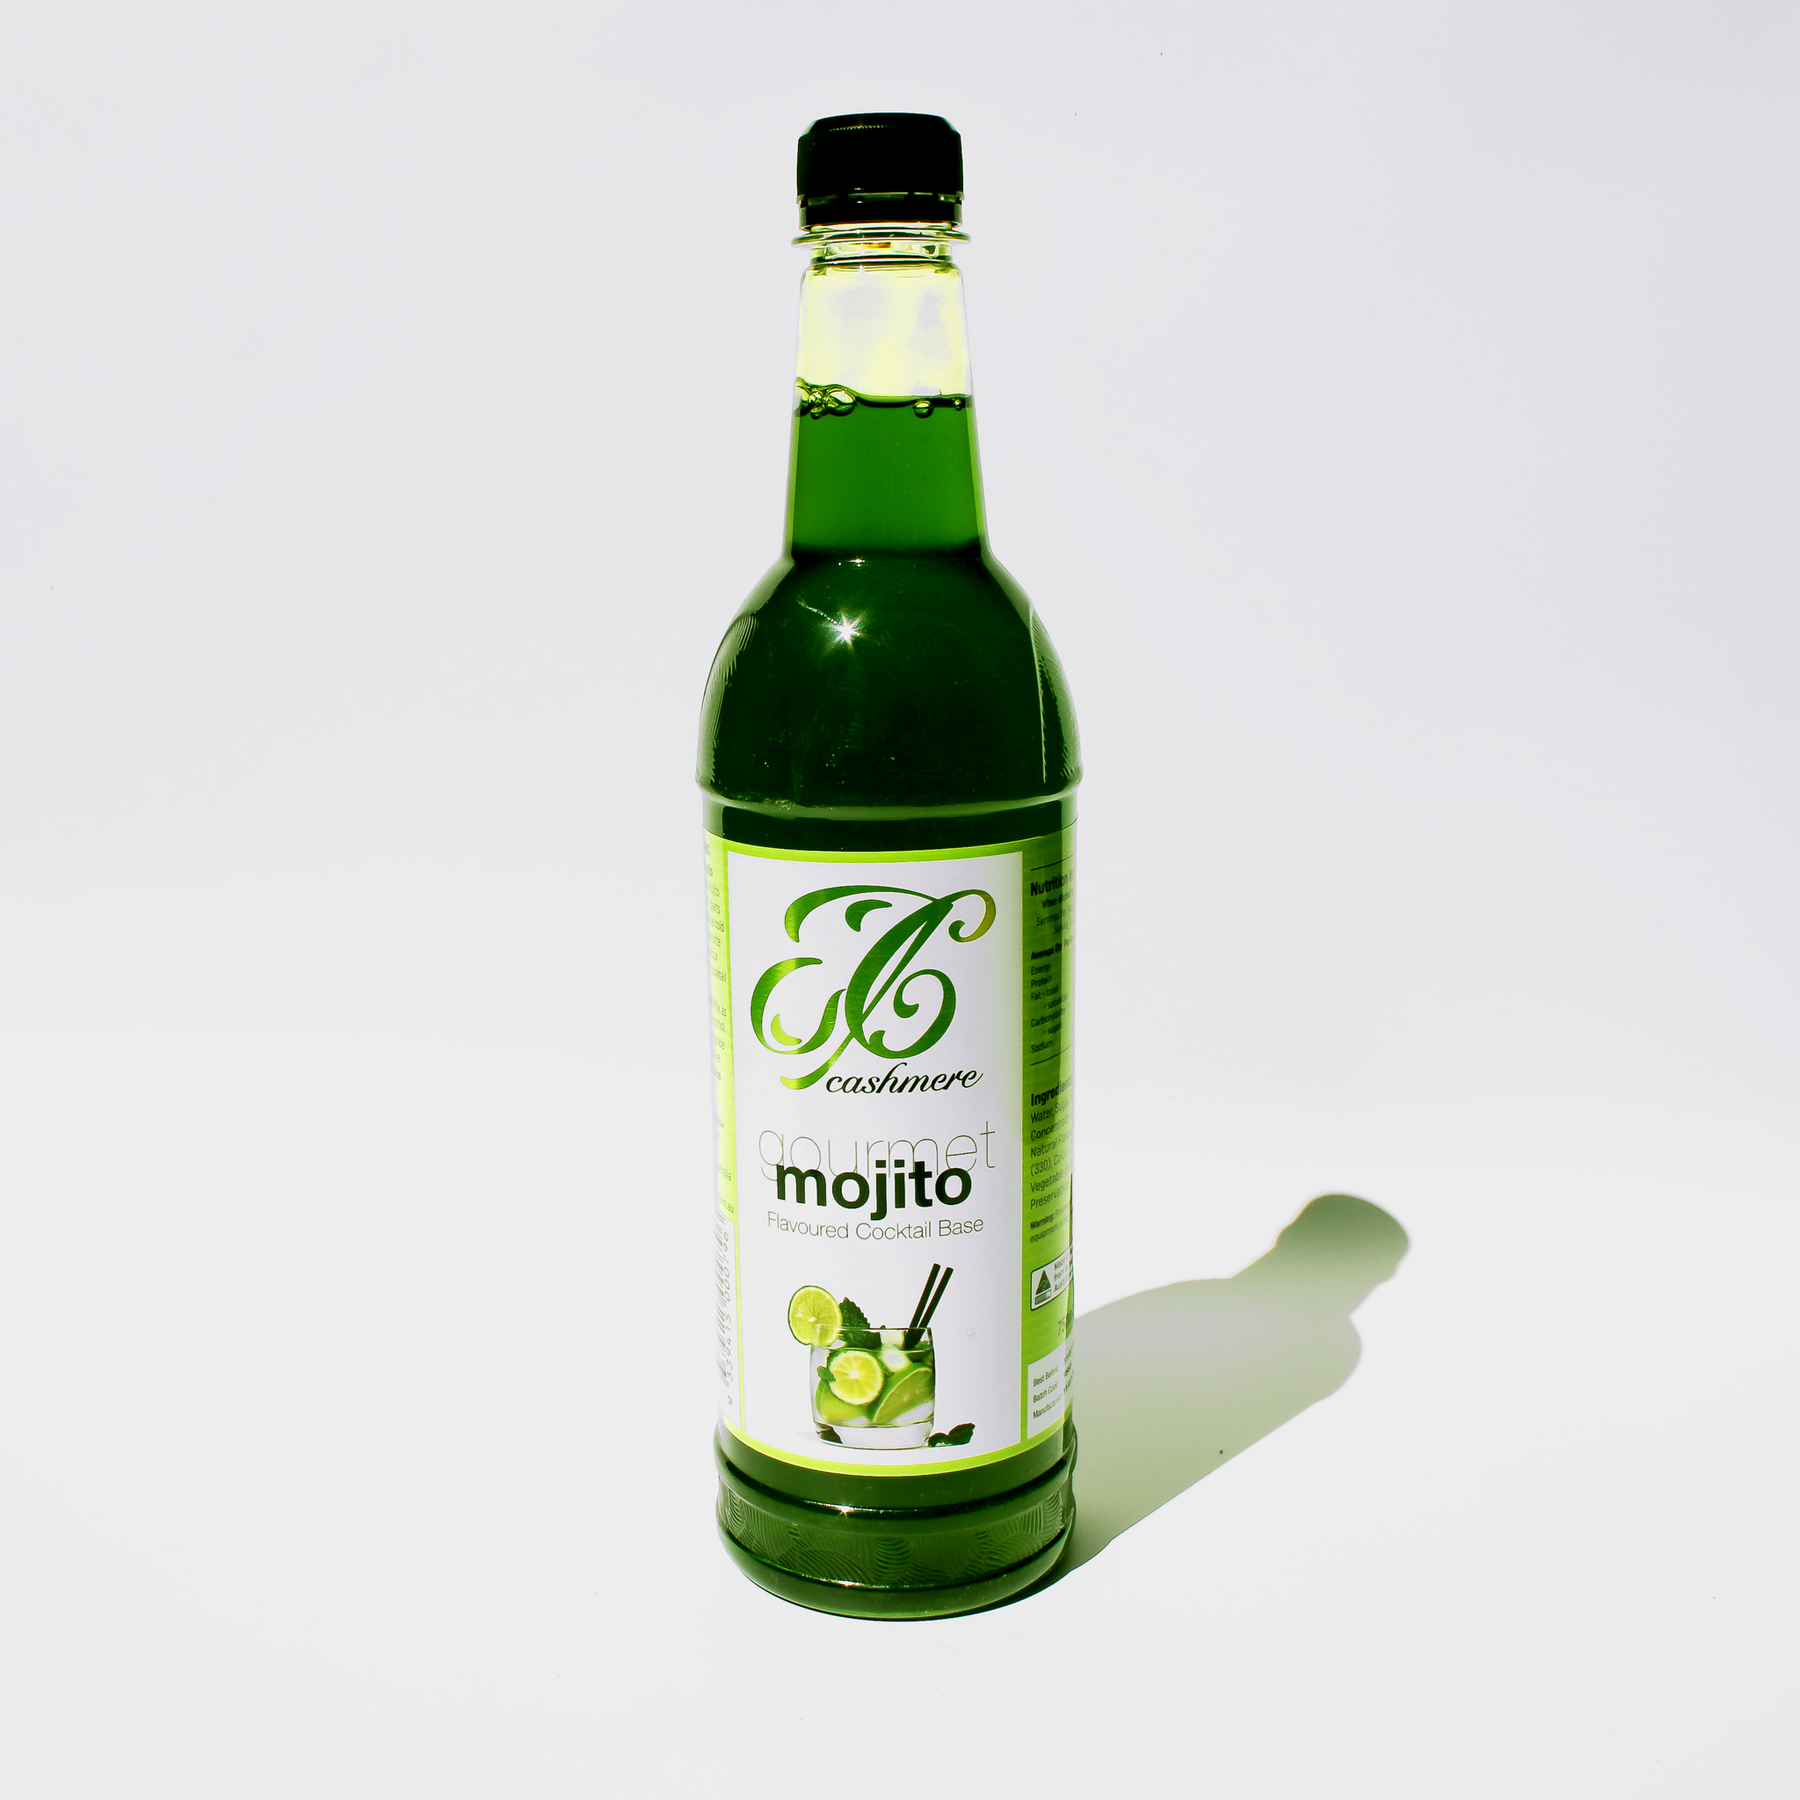 Mojito Cocktail – Mix Syrups Cashmere